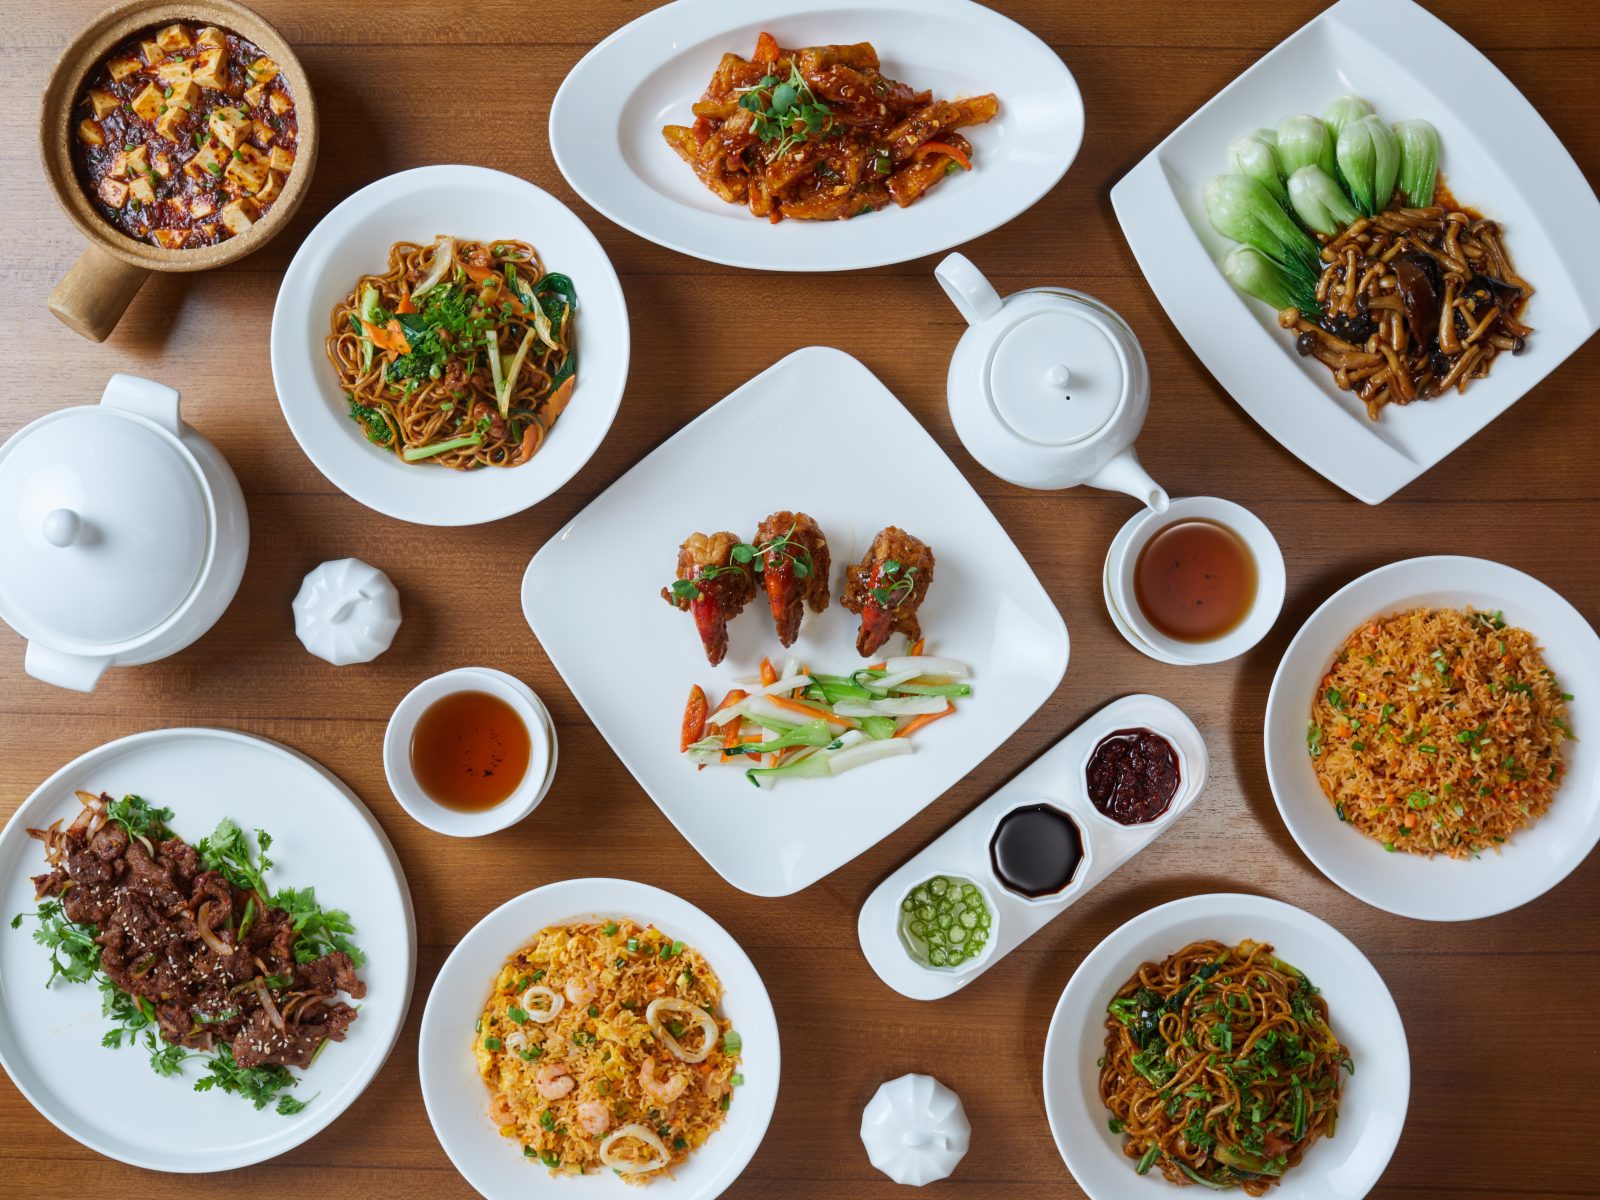 A selection of staples including prawns, tofu, fried rice, noodles among other dishes at Yi Jing